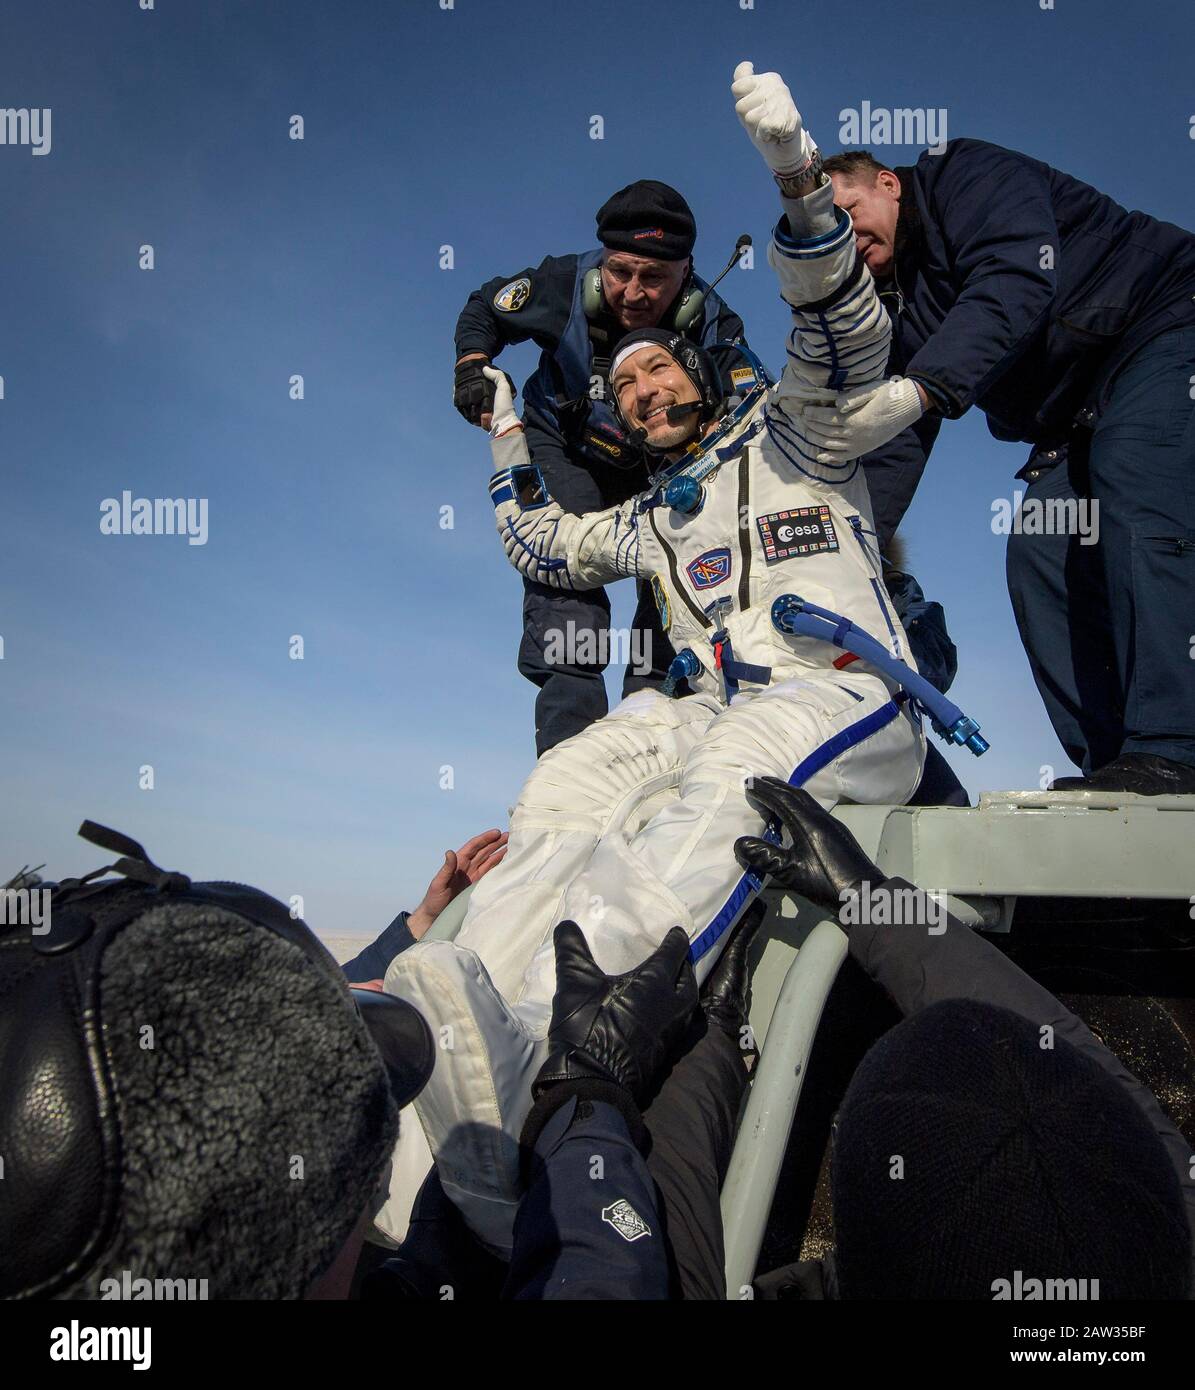 ESA astronaut Luca Parmitano is helped out of the Soyuz MS-13 spacecraft just minutes after he, NASA astronaut Christina Koch, and Roscosmos cosmonaut Alexander Skvortsov, landed their Soyuz MS-13 capsule in a remote area near the town of Zhezkazgan, Kazakhstan on Thursday, Feb. 6, 2020. Koch returned to Earth after logging 328 days in space --- the longest spaceflight in history by a woman --- as a member of Expeditions 59-60-61 on the International Space Station. Skvortsov and Parmitano returned after 201 days in space where they served as Expedition 60-61 crew members onboard the station. P Stock Photo